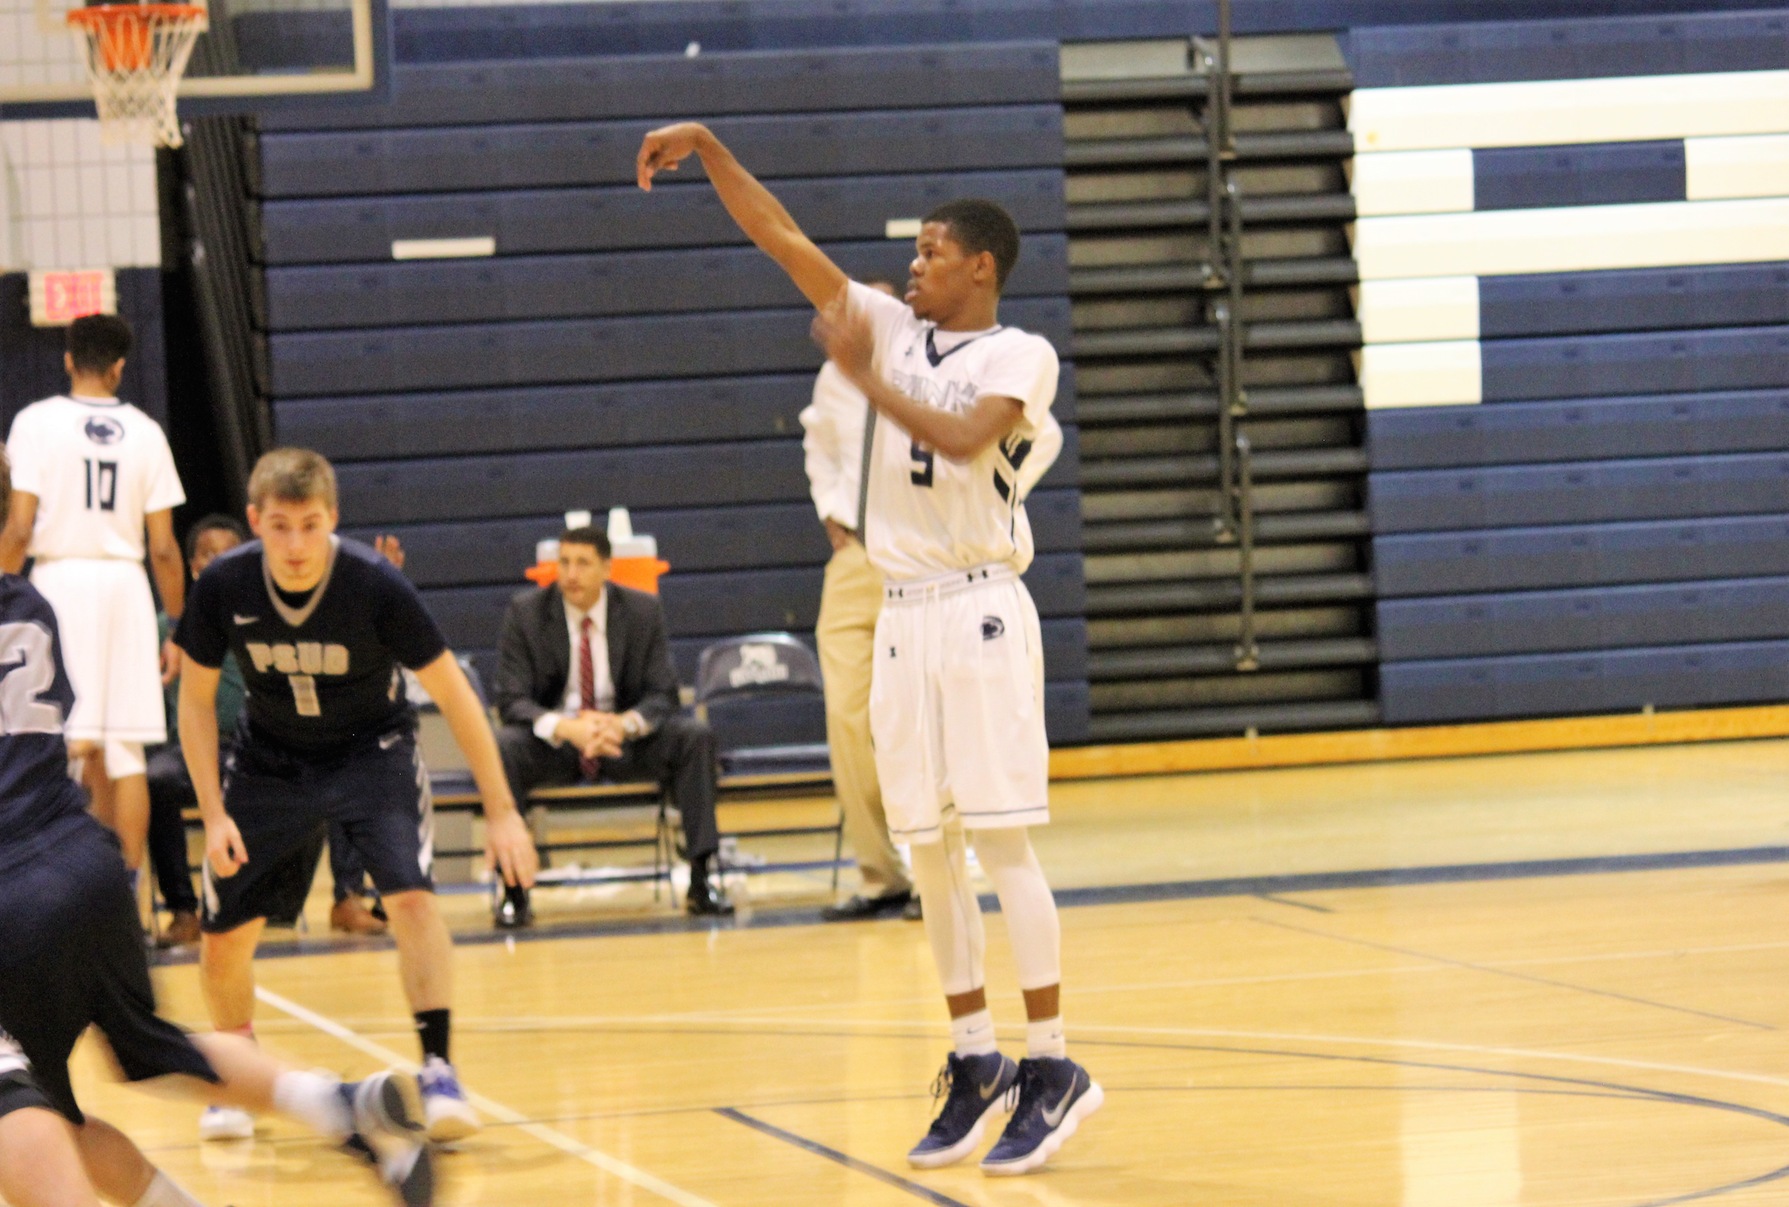 Men's Basketball Cruises Against Worthington-Scranton behind 34 Points from Broadwater